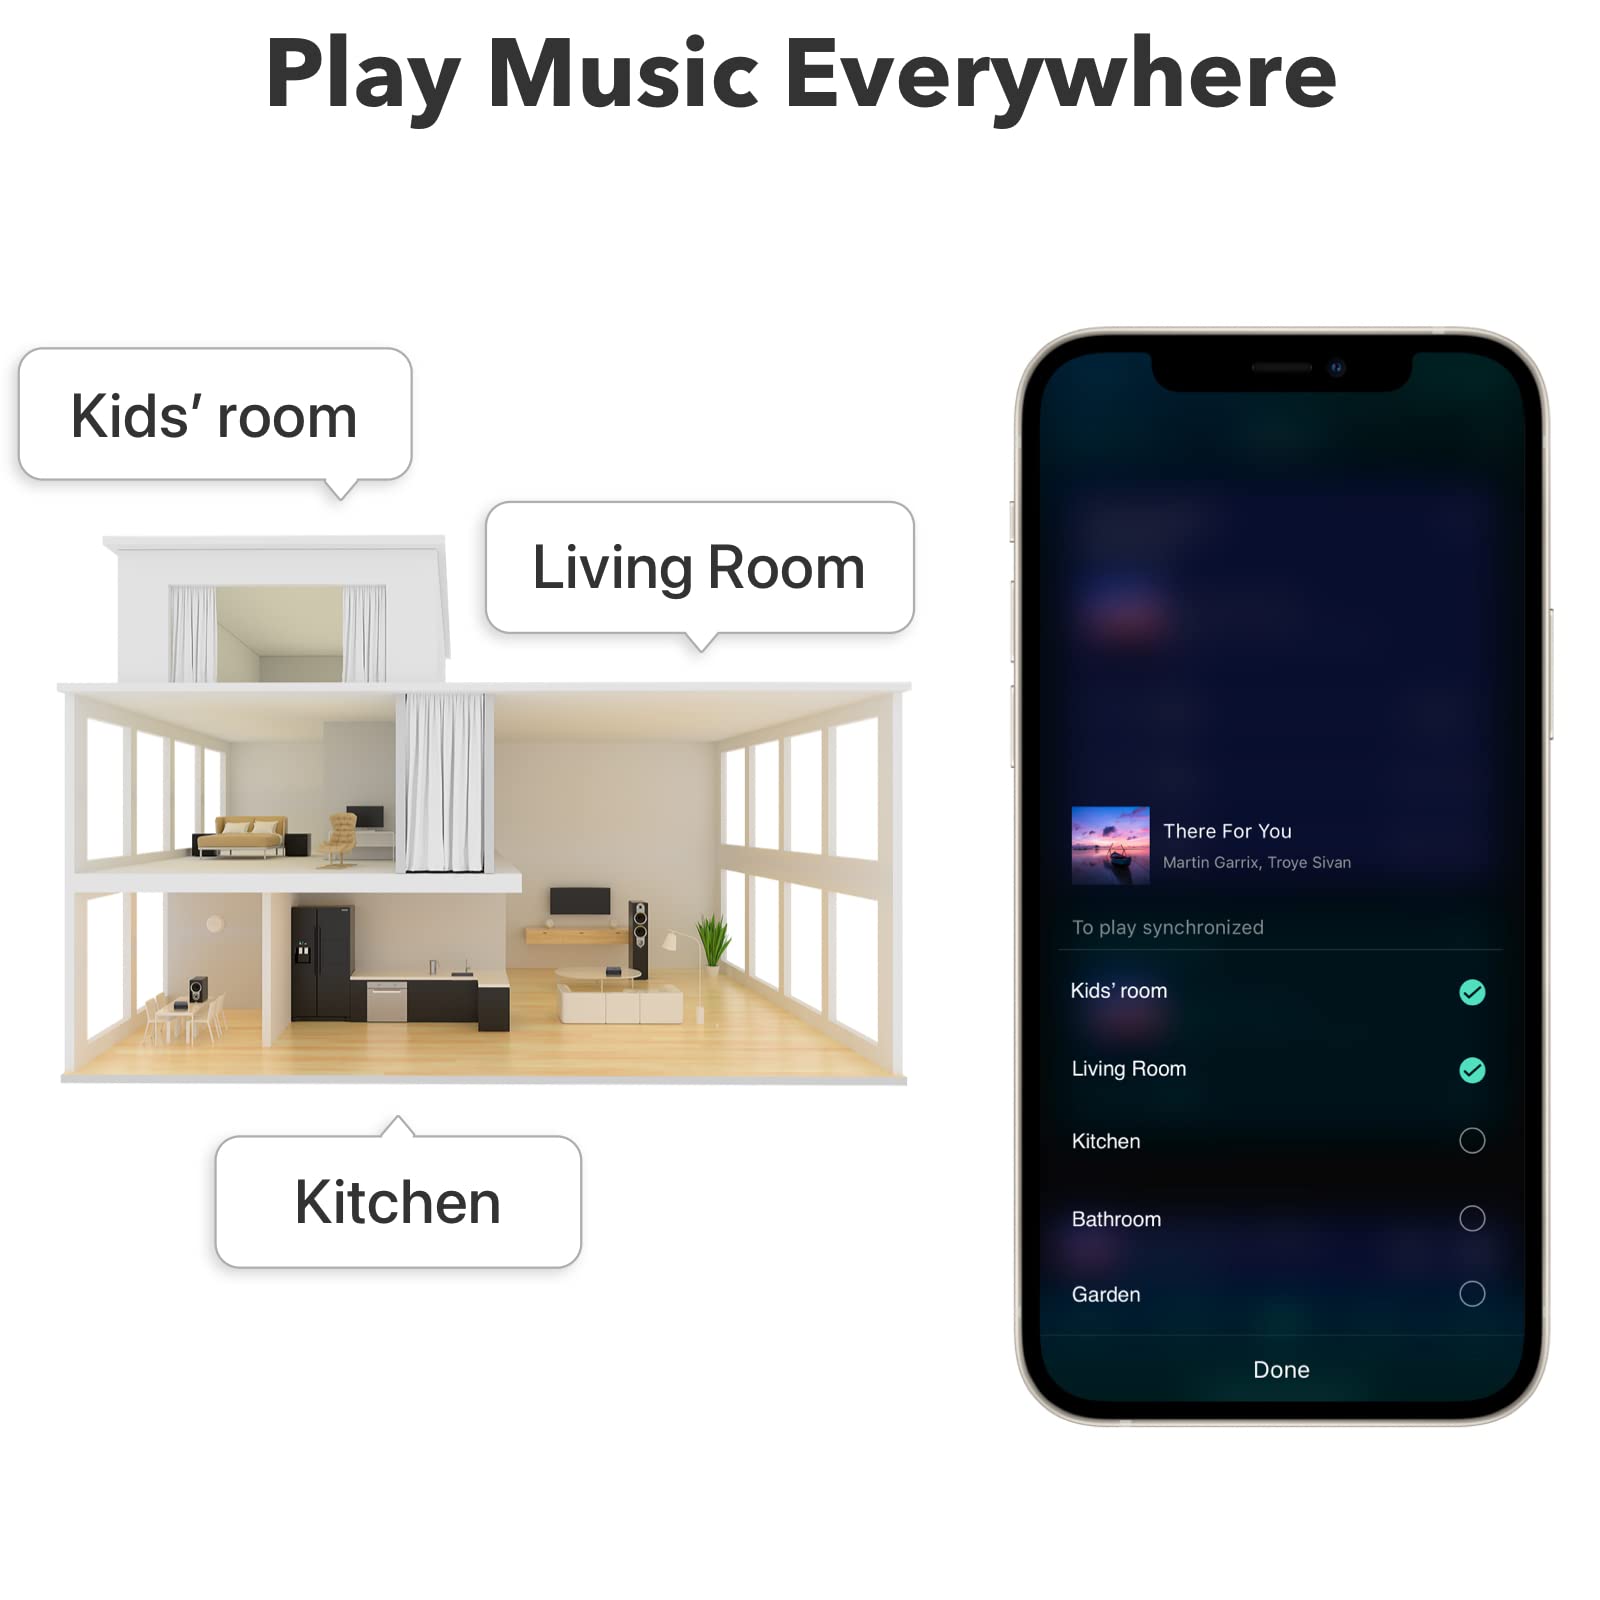 WiiM Pro AirPlay 2 Receiver, Chromecast Audio, WiFi Multiroom Streamer, Compatible with Alexa, Siri and Google Assistant, Stream Hi-Res Audio from Spotify, Amazon Music, Tidal and More